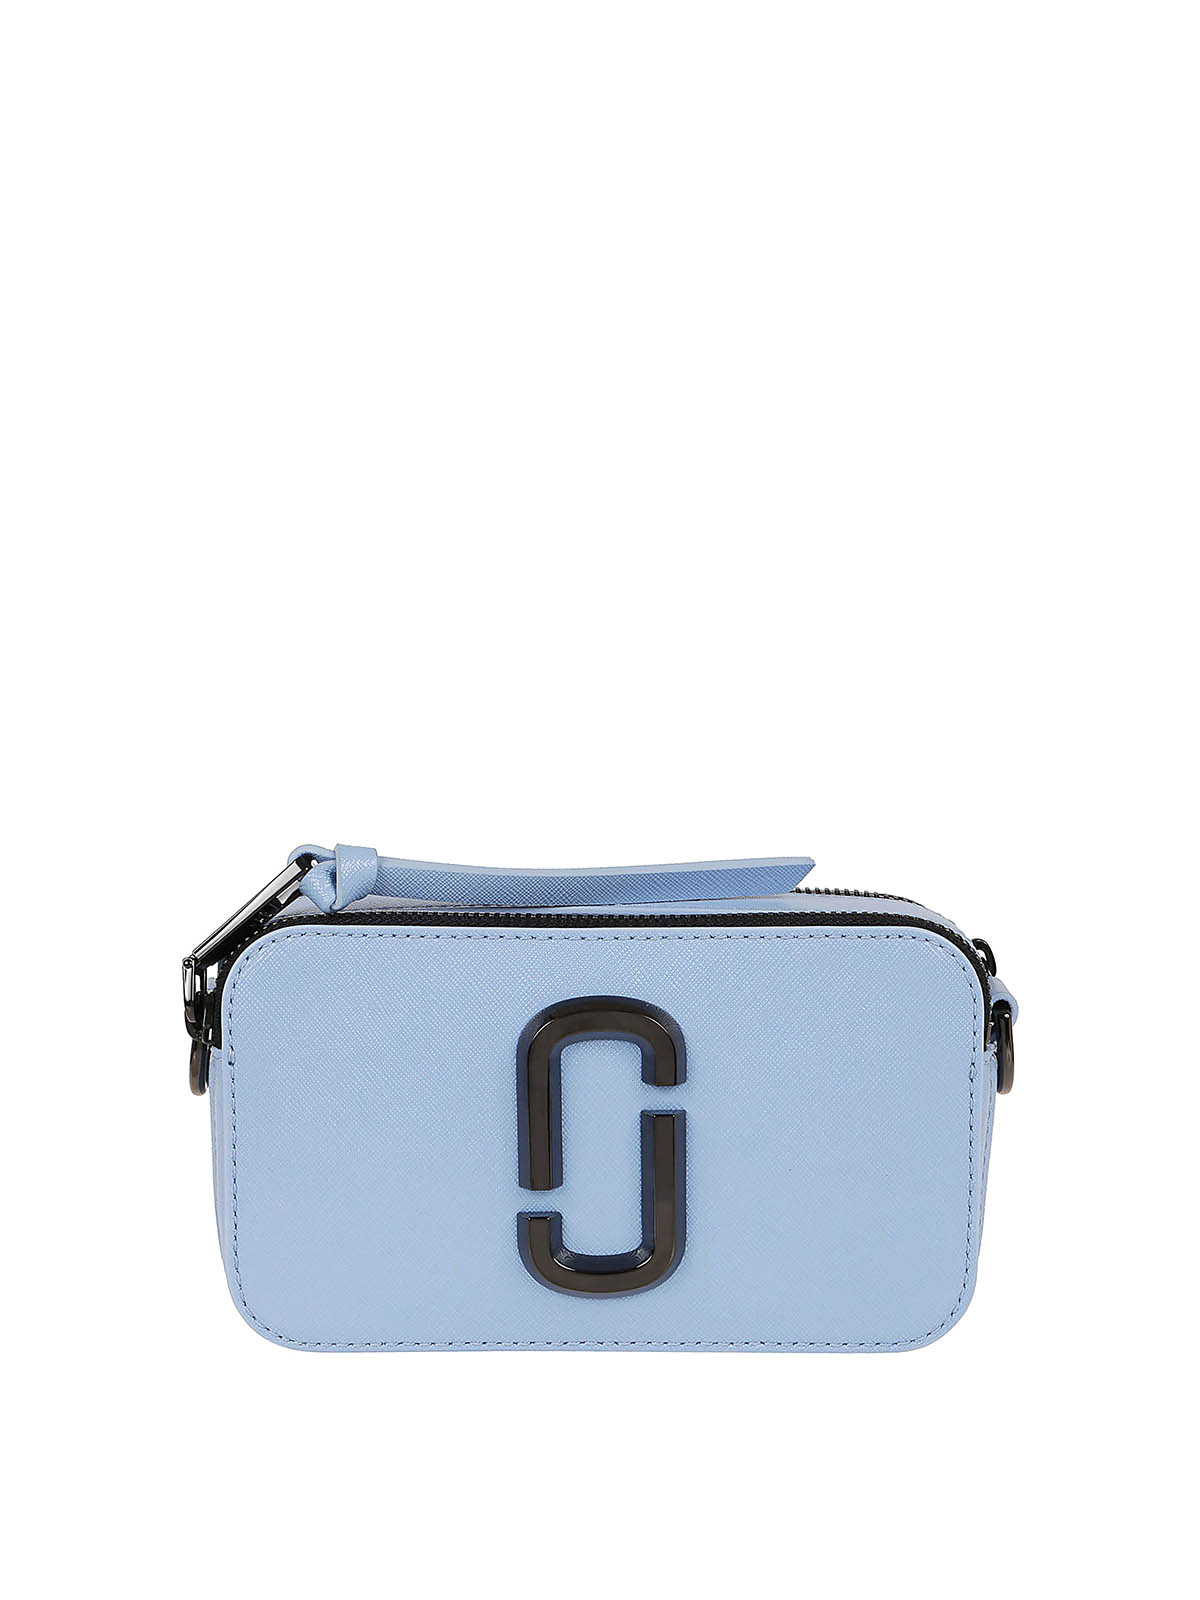 Marc Jacobs Light Blue Snapshot DTM Small Saffiano Leather Camera